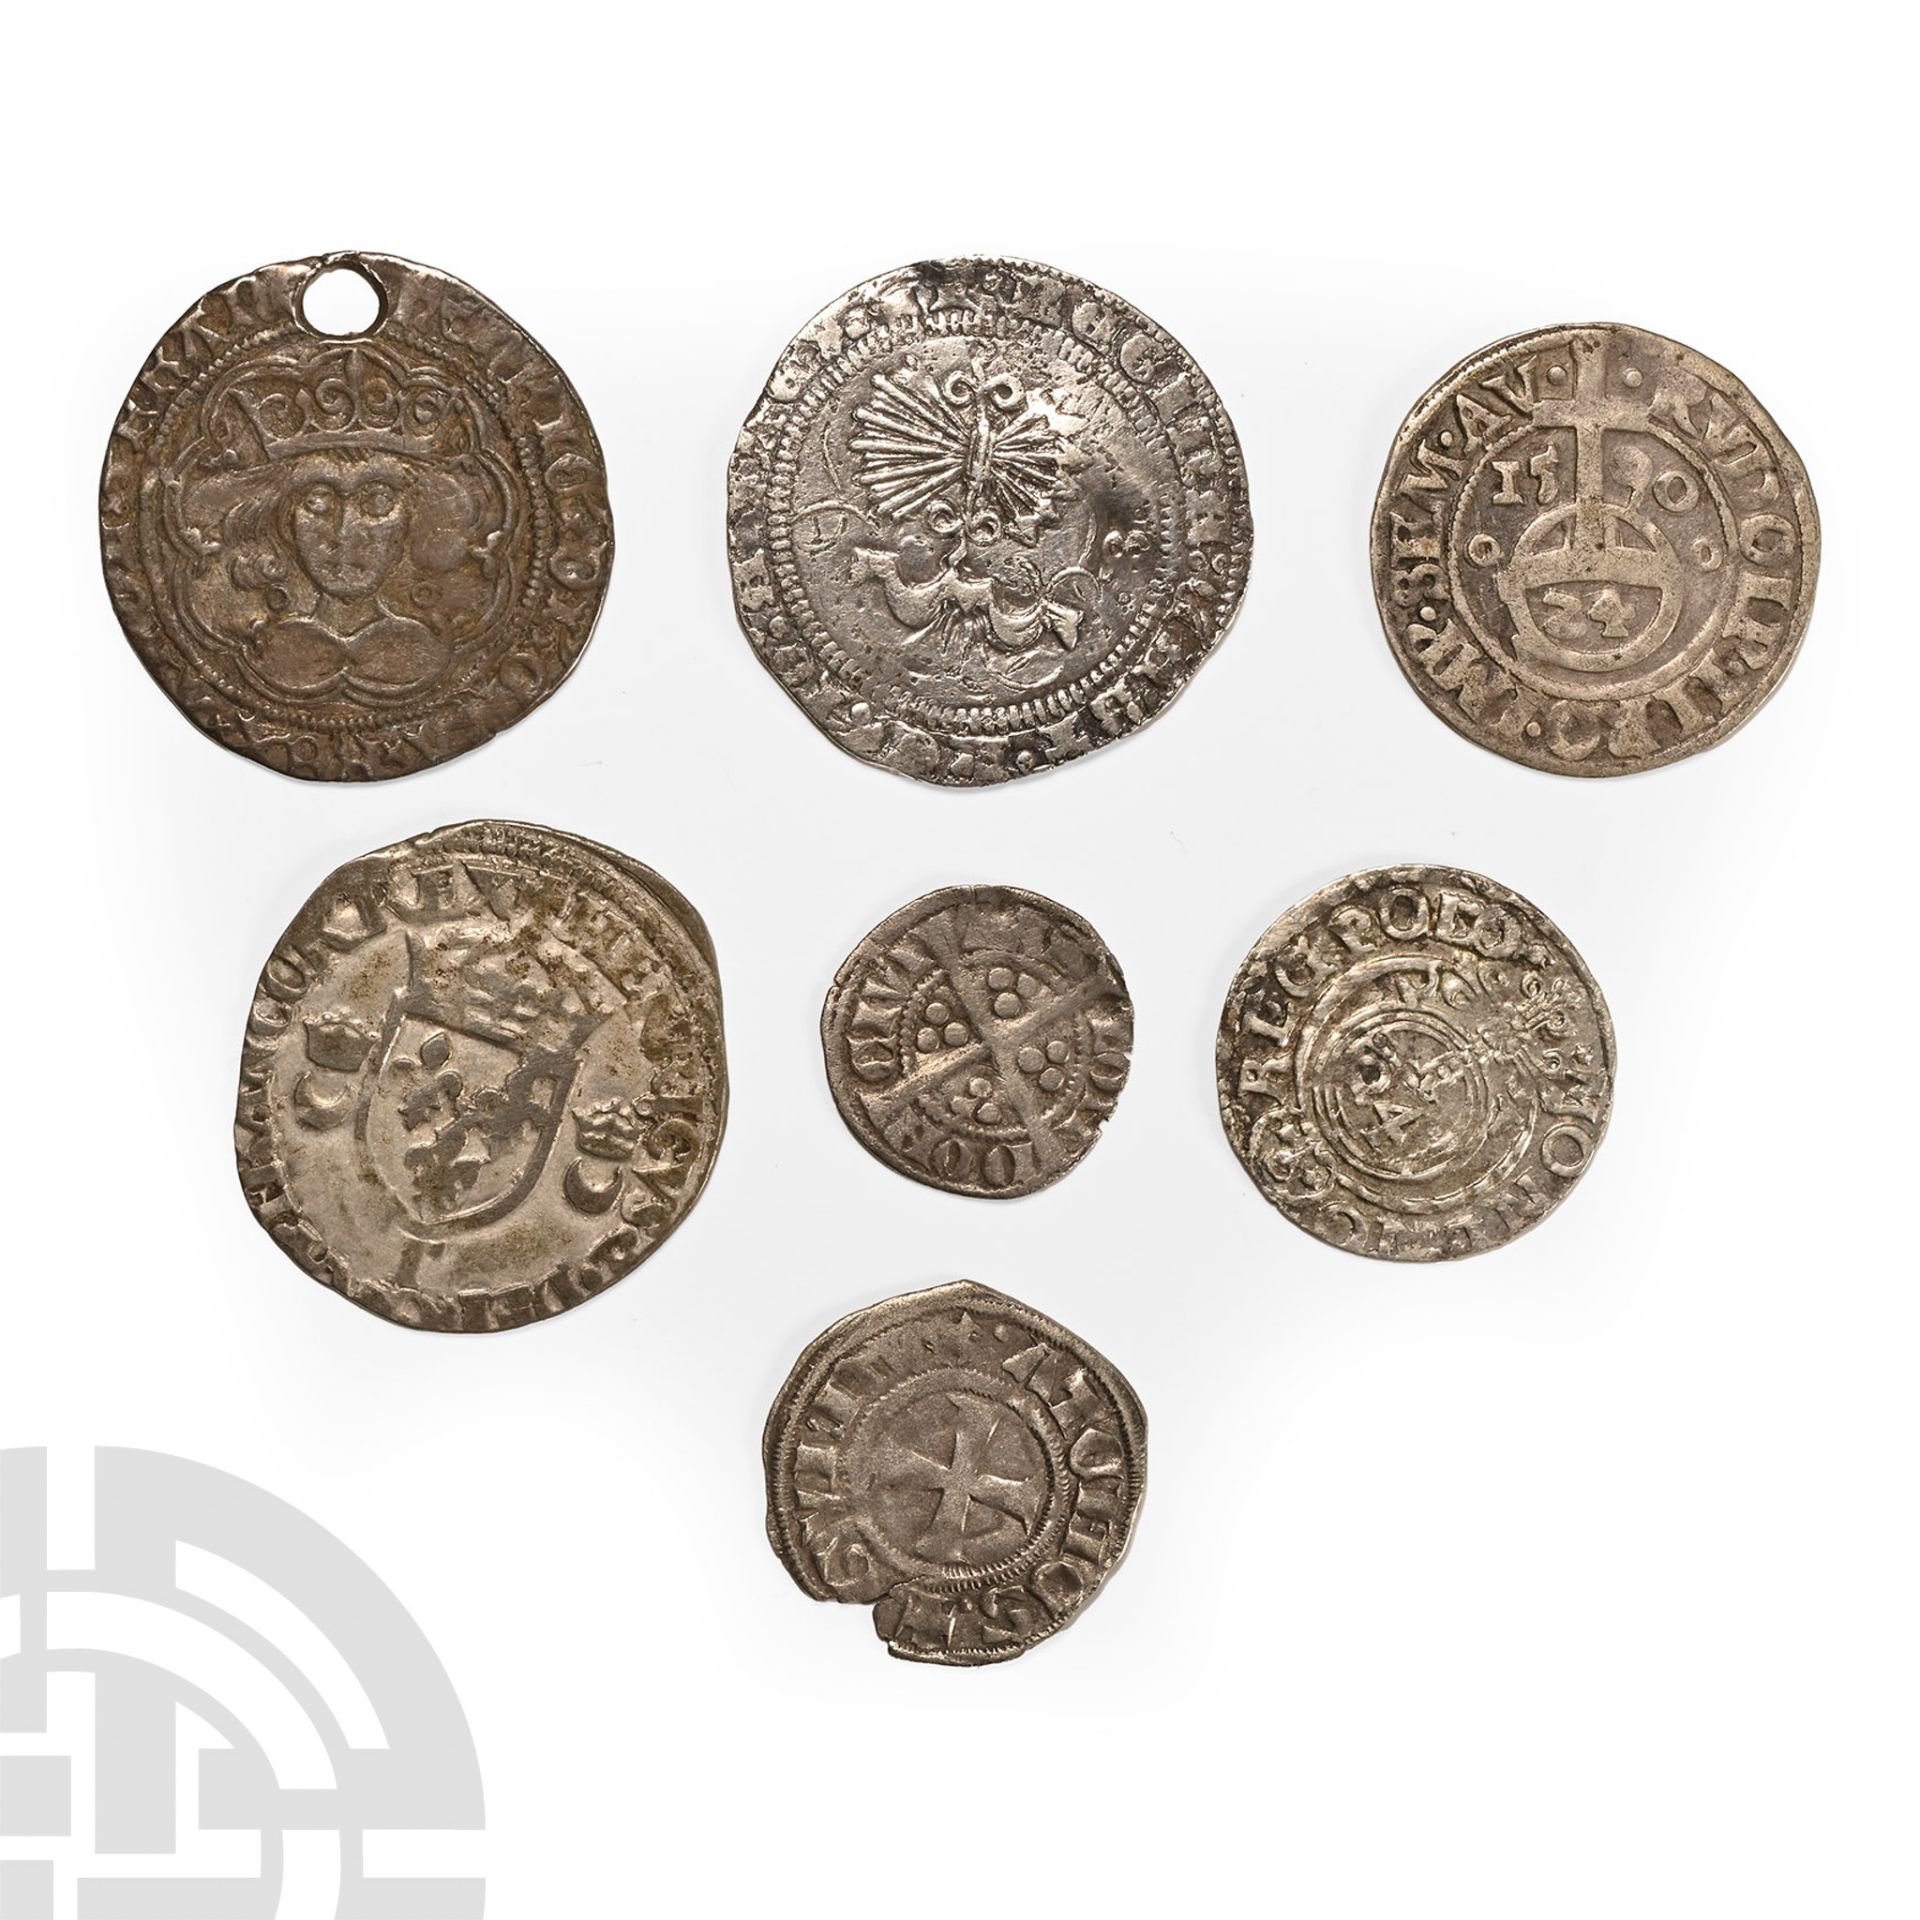 English Medieval Coins and European AR Hammered Coin Group [7]